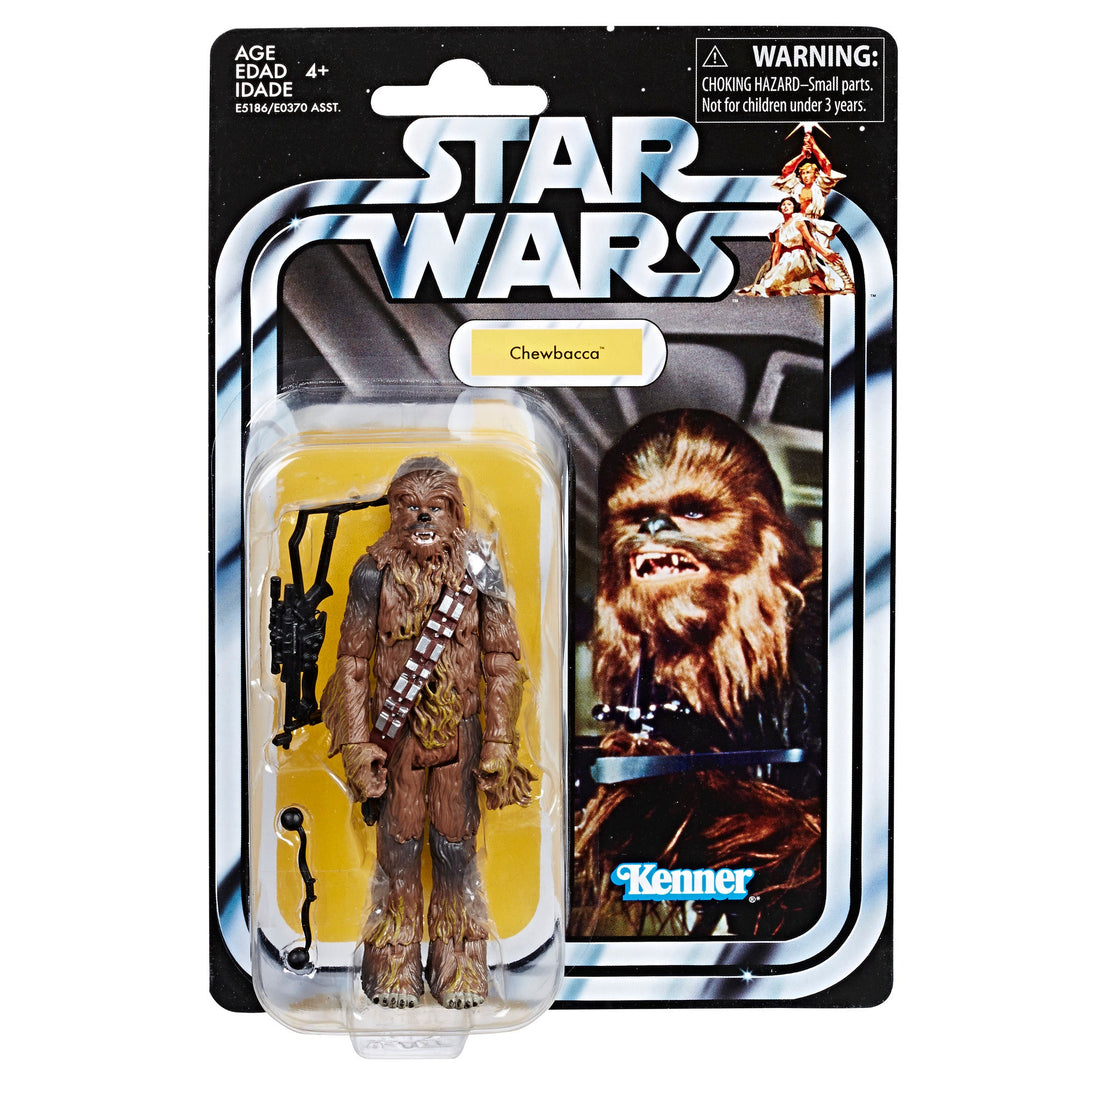 Star Wars The Vintage Collection Star Wars: A New Hope Chewbacca Figure